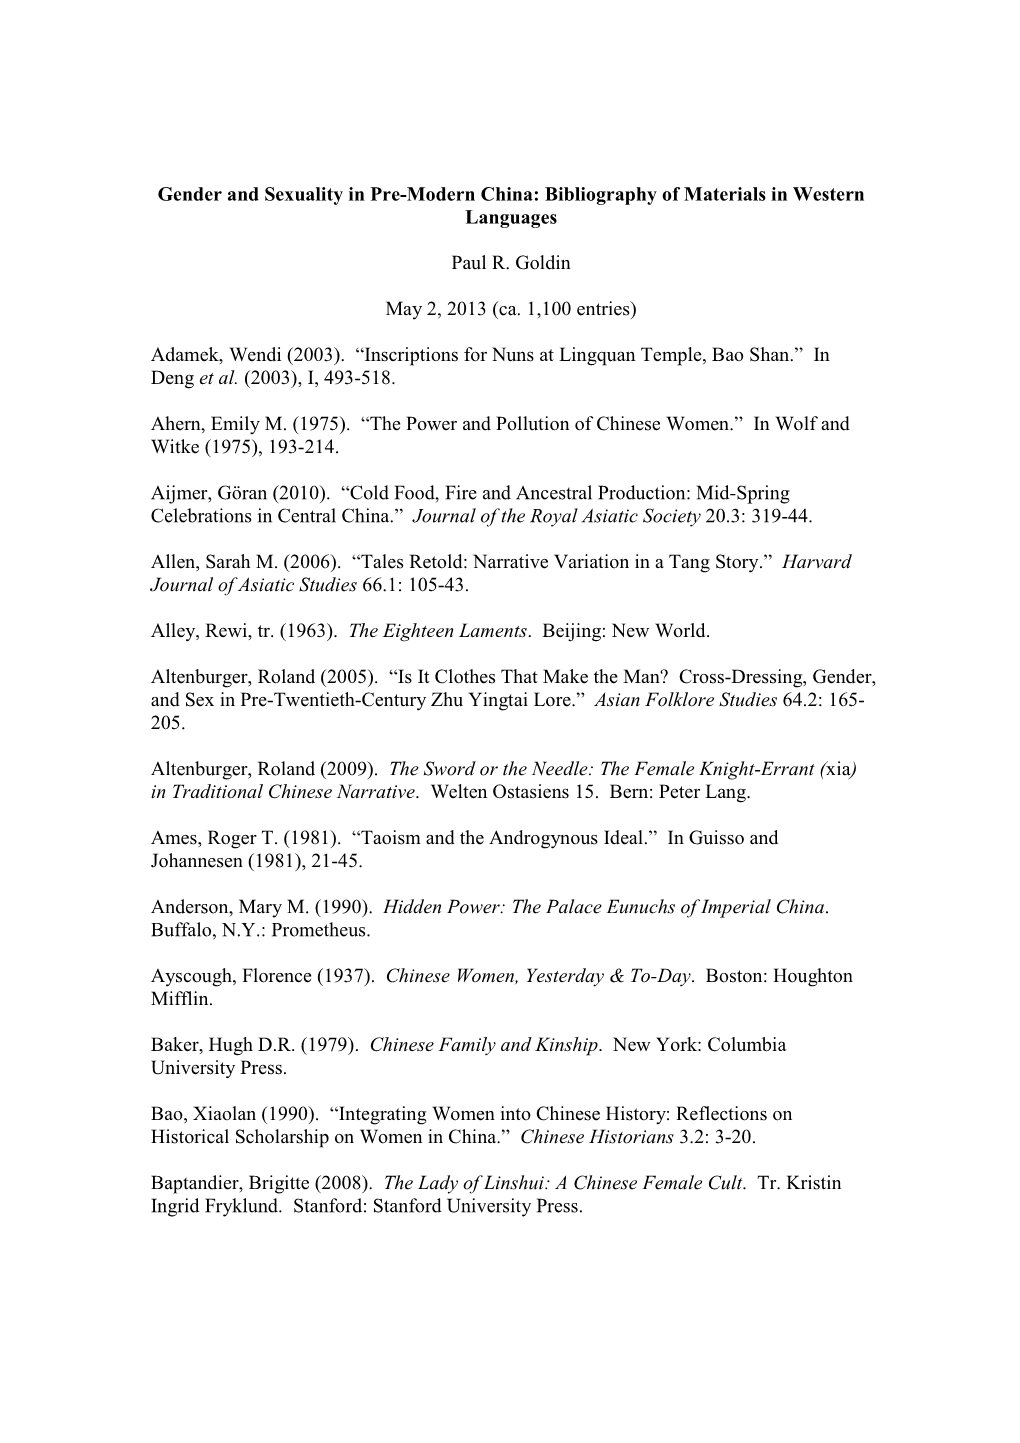 Gender and Sexuality Bibliography